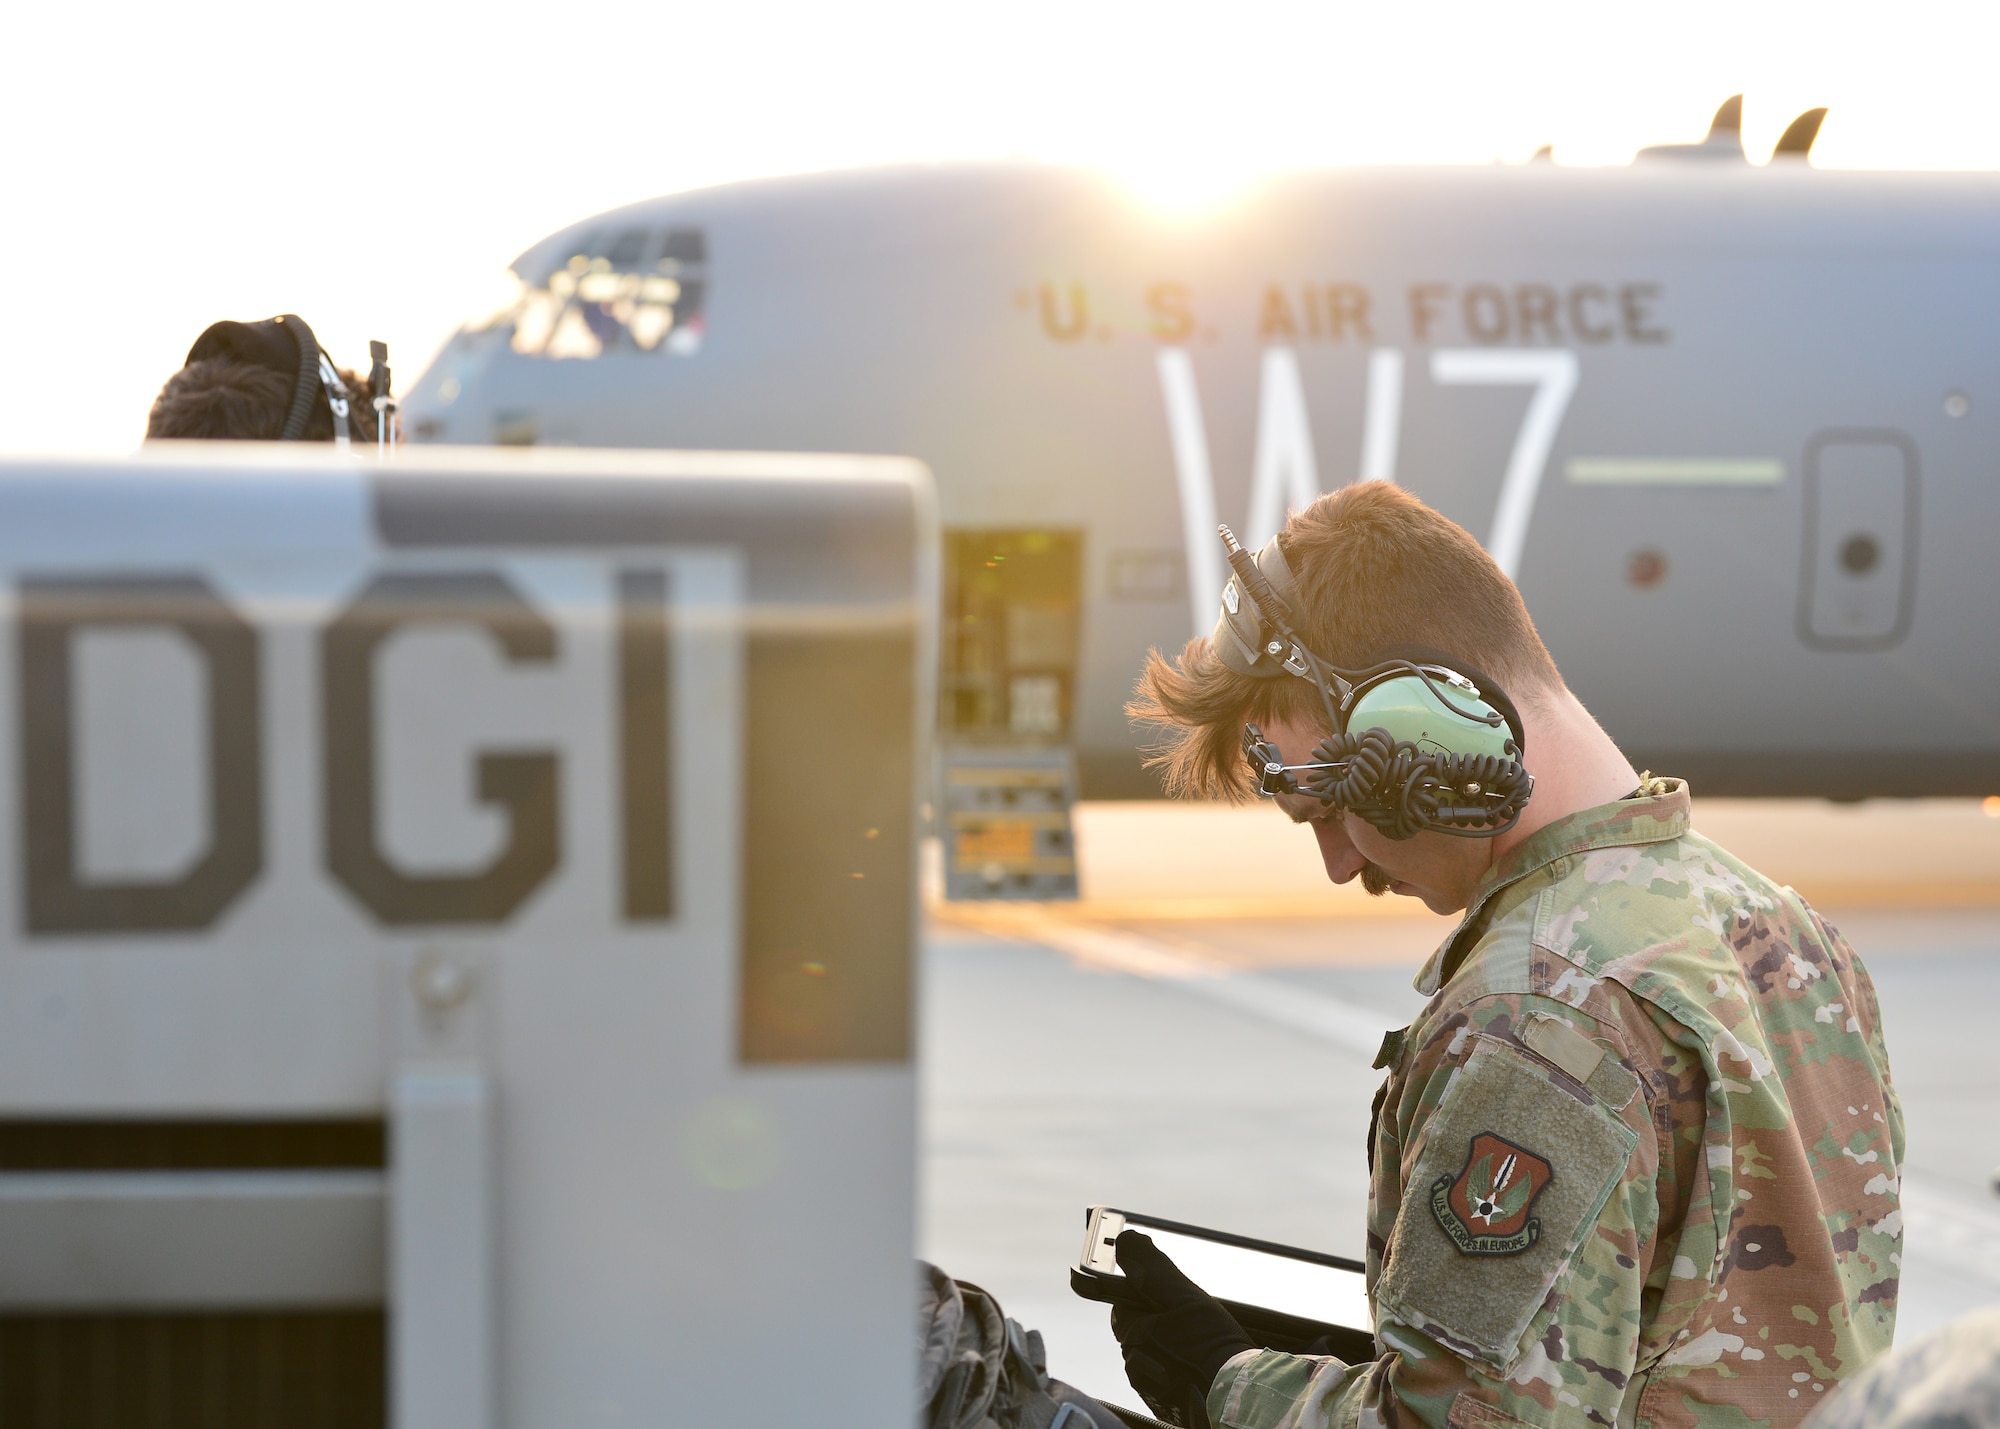 U.S. Air Force Staff Sgt. Joshua Poindexter, 86th Aircraft Maintenance Squadron flying crew chief, runs through a preflight checklist for a C-130J Super Hercules at Powidz Air Base, Poland, July 10, 2019. Approximately 80 Airmen and three aircraft deployed to Powidz Air Base in support of Aviation Rotation 19-3, a bilateral training exercise between the U.S. and Polish air forces. (U.S. Air Force photo by Staff Sgt. Jimmie D. Pike)